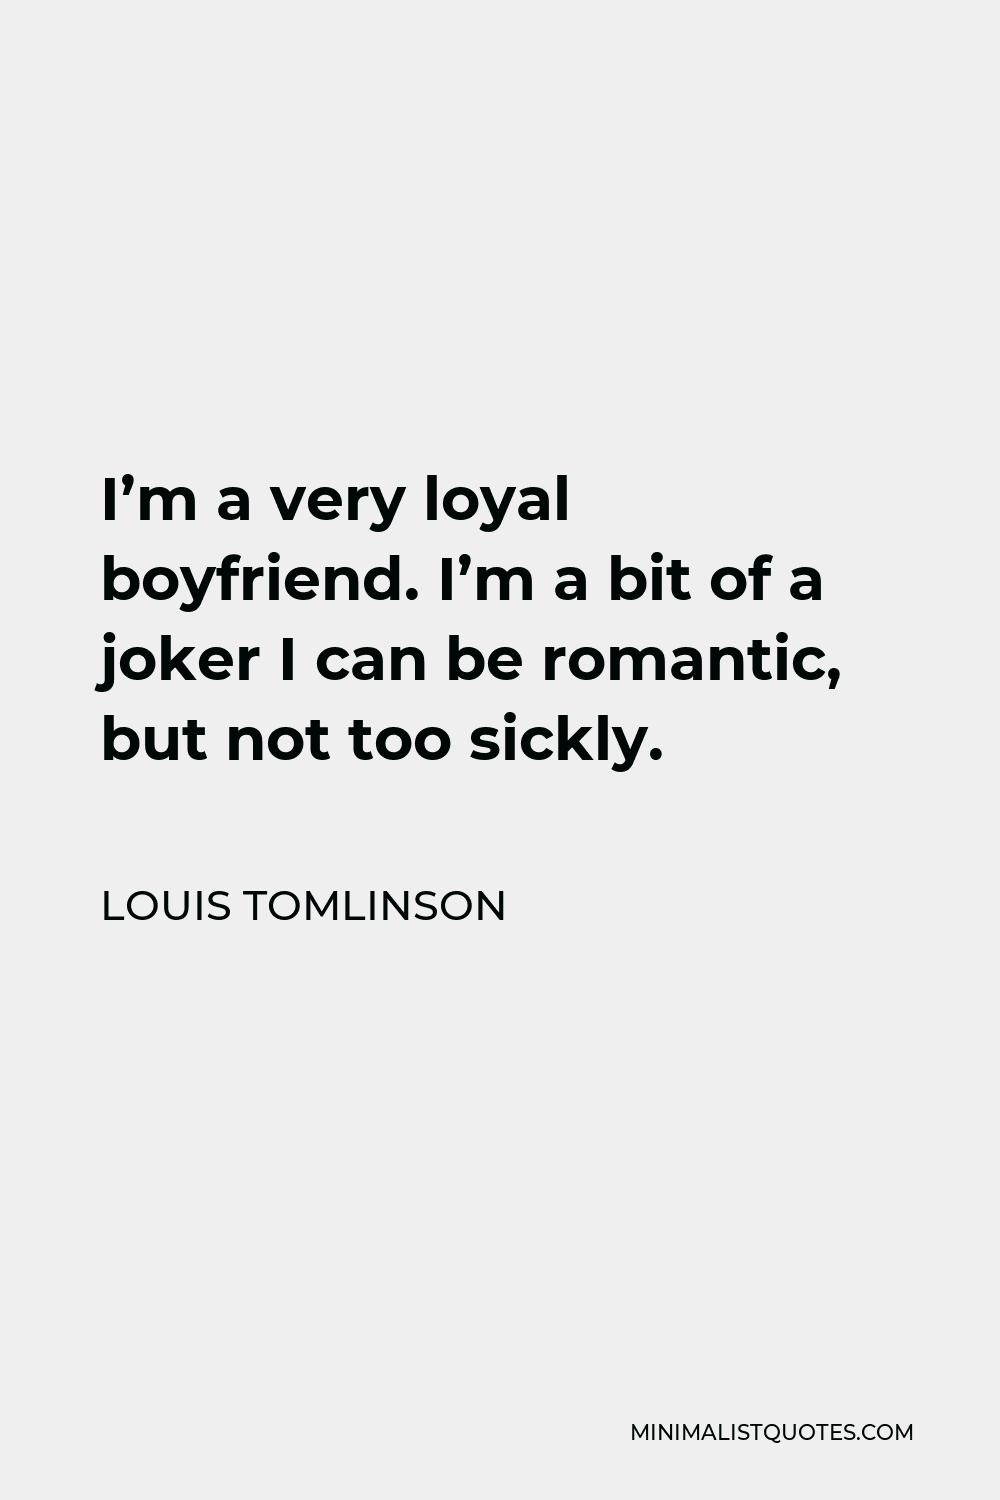 Louis Tomlinson Quote - I’m a very loyal boyfriend. I’m a bit of a joker I can be romantic, but not too sickly.